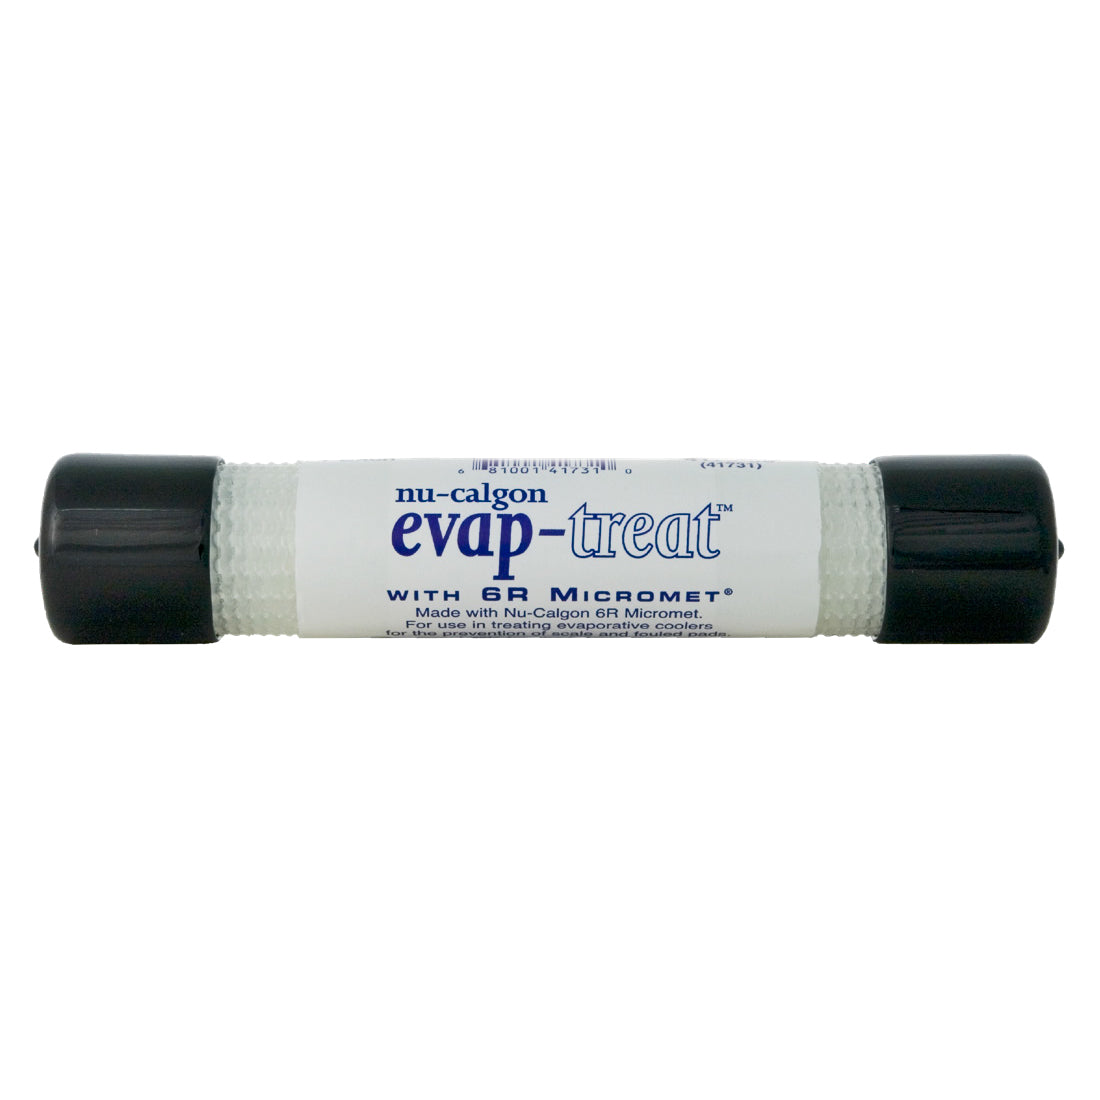 4173-06 - Evap-Treat Evaporative Cooler Treatment for Coolers Up to 10000 CFM